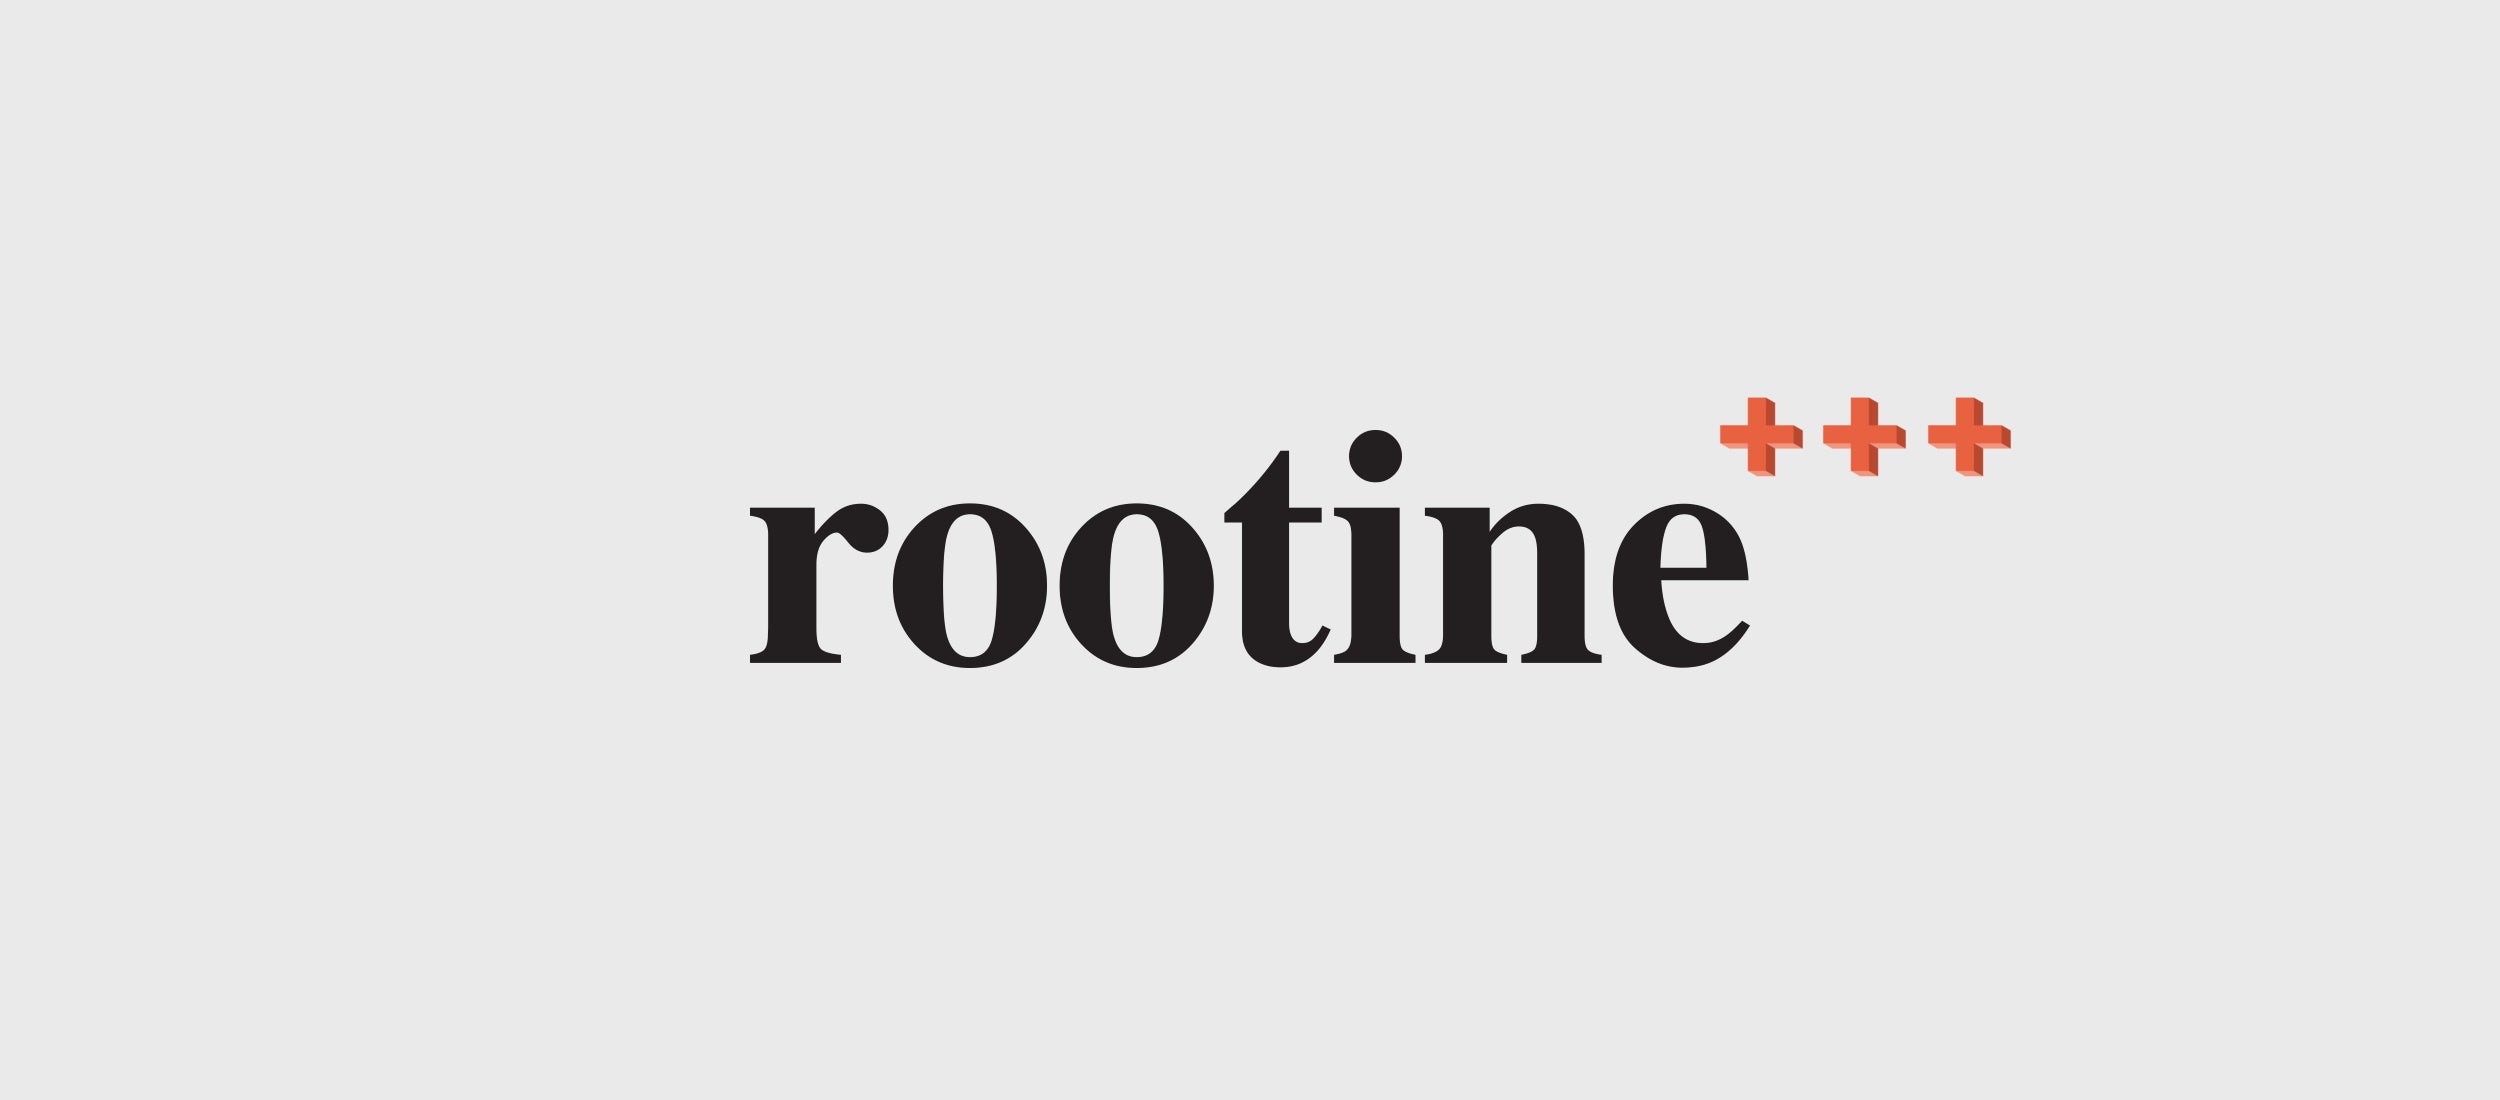 Updates To The Rootine Nutrient Suite